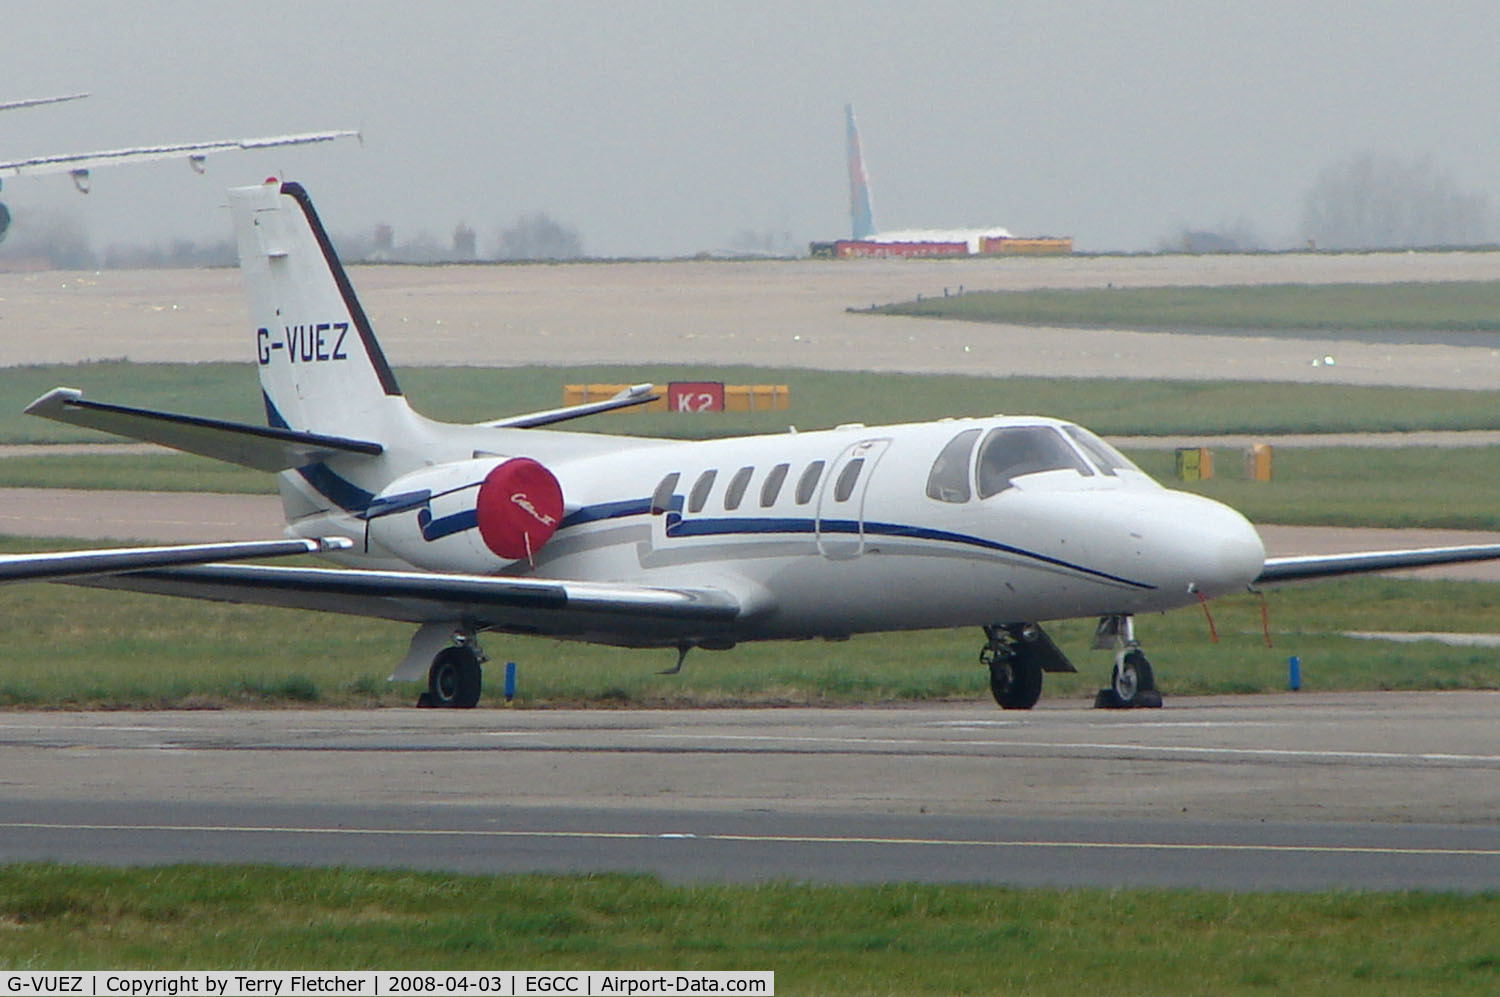 G-VUEZ, 1979 Cessna 550 Citation II C/N 550-0008, Cessna 550 parked on the remote executive ramp at Manchester